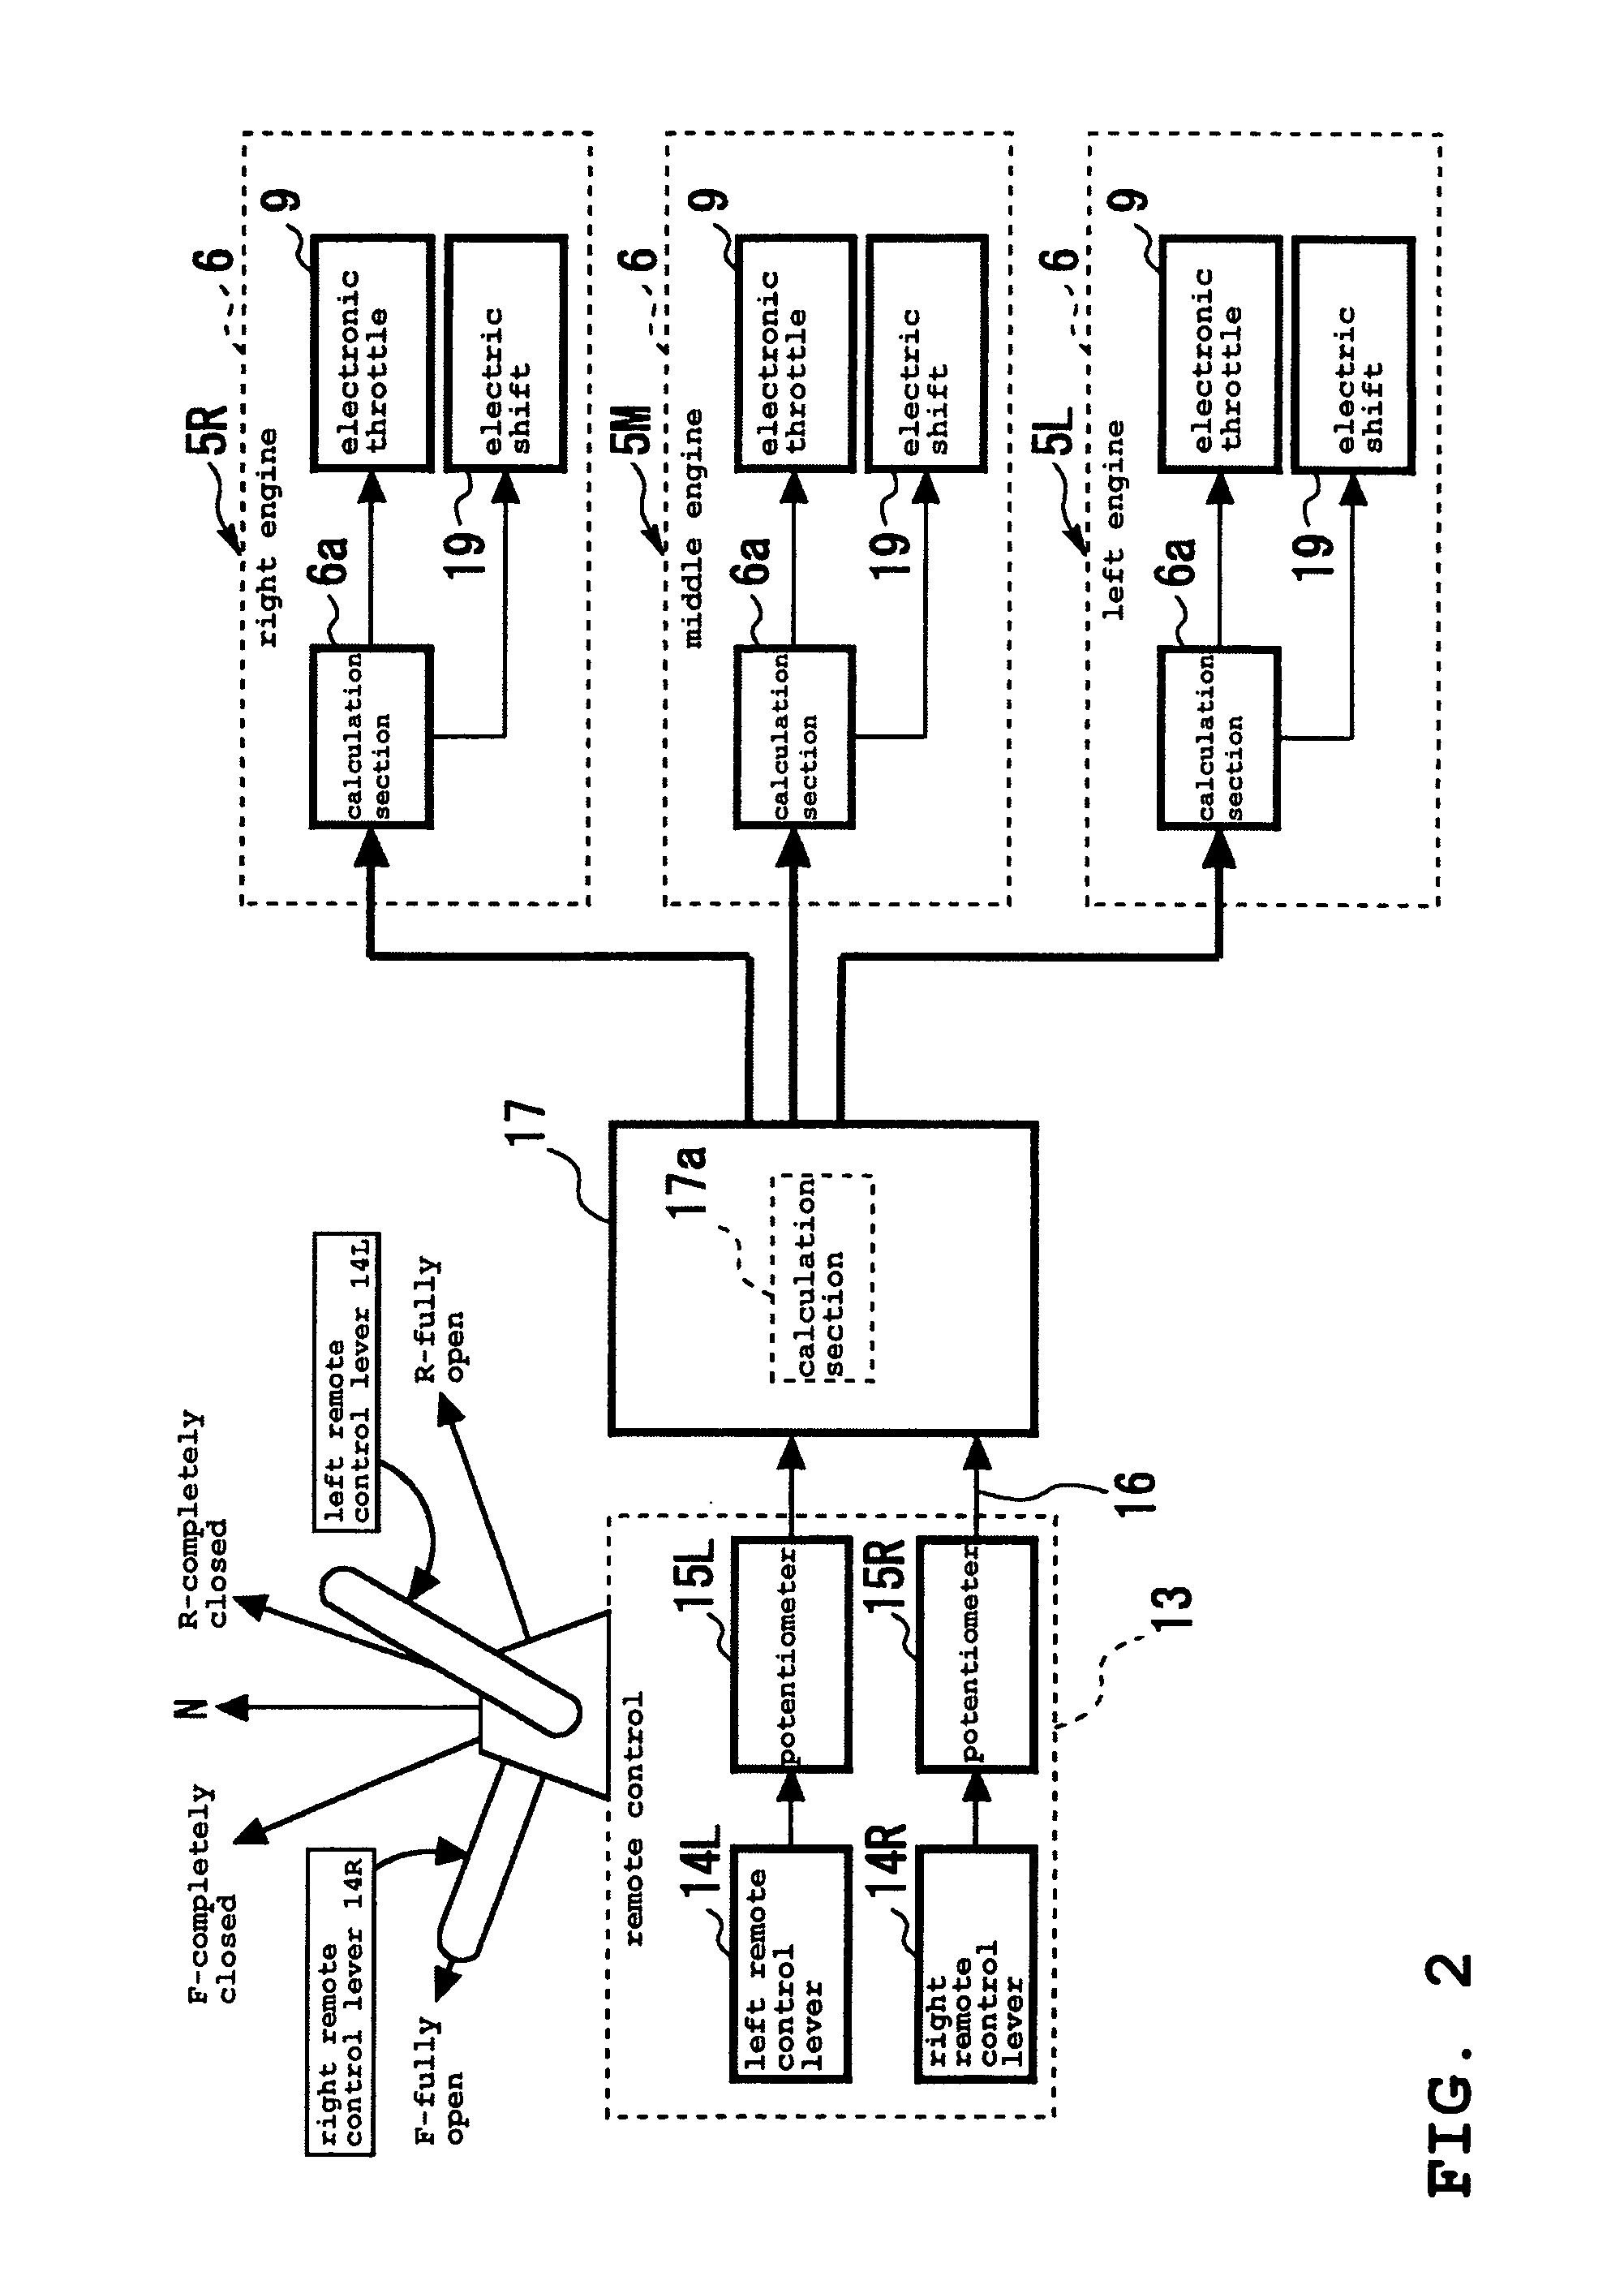 Control system for watercraft propulsion units